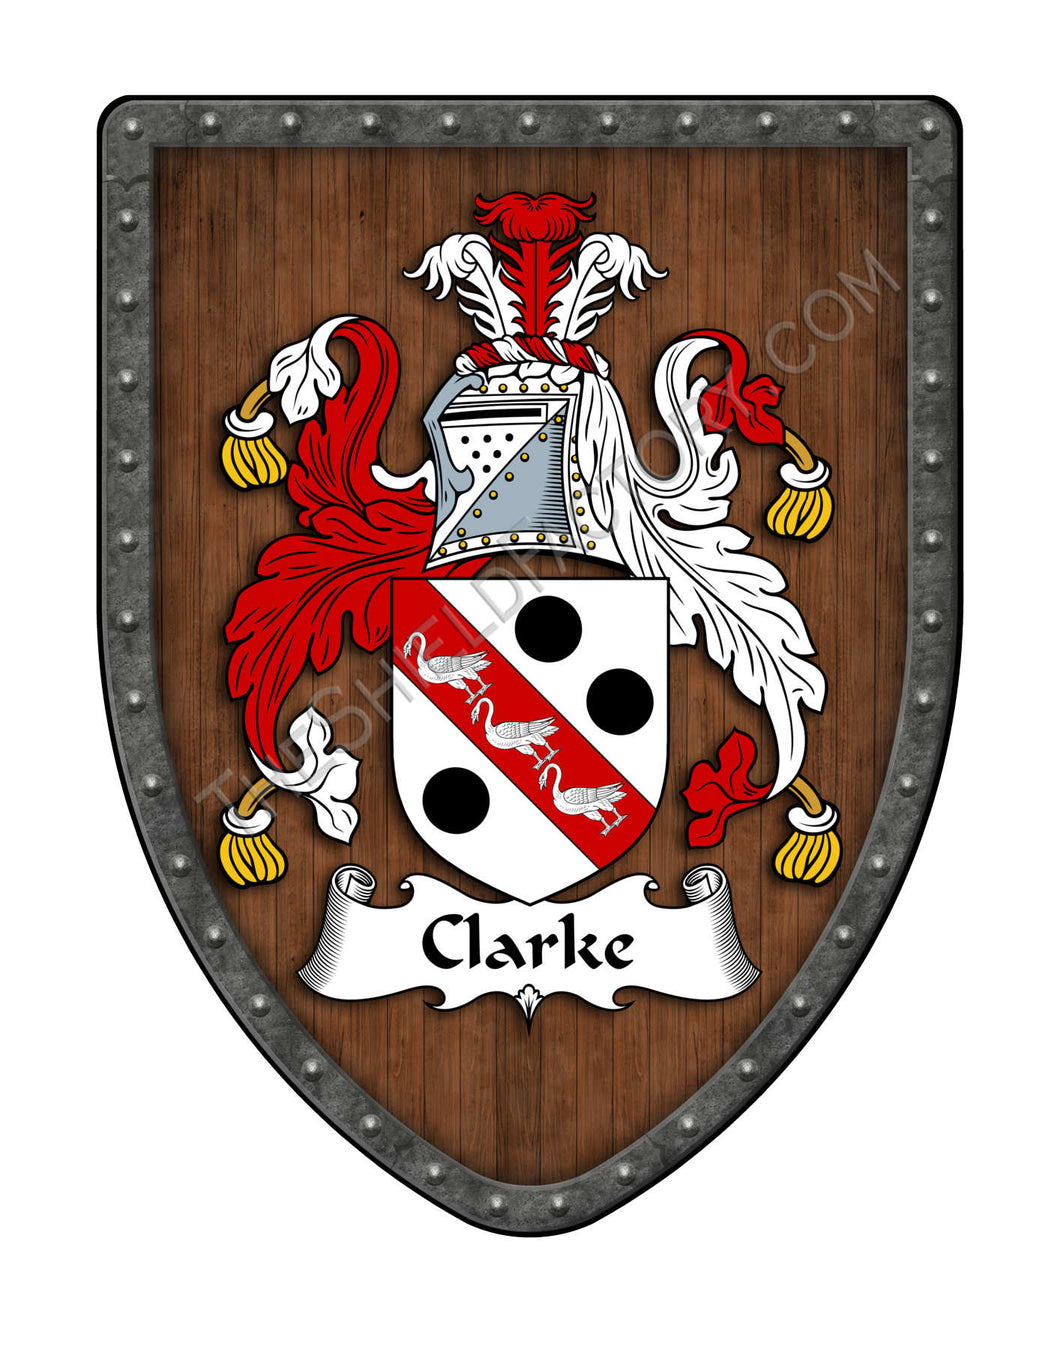 Clarke Coat of Arms Shield Family Crest